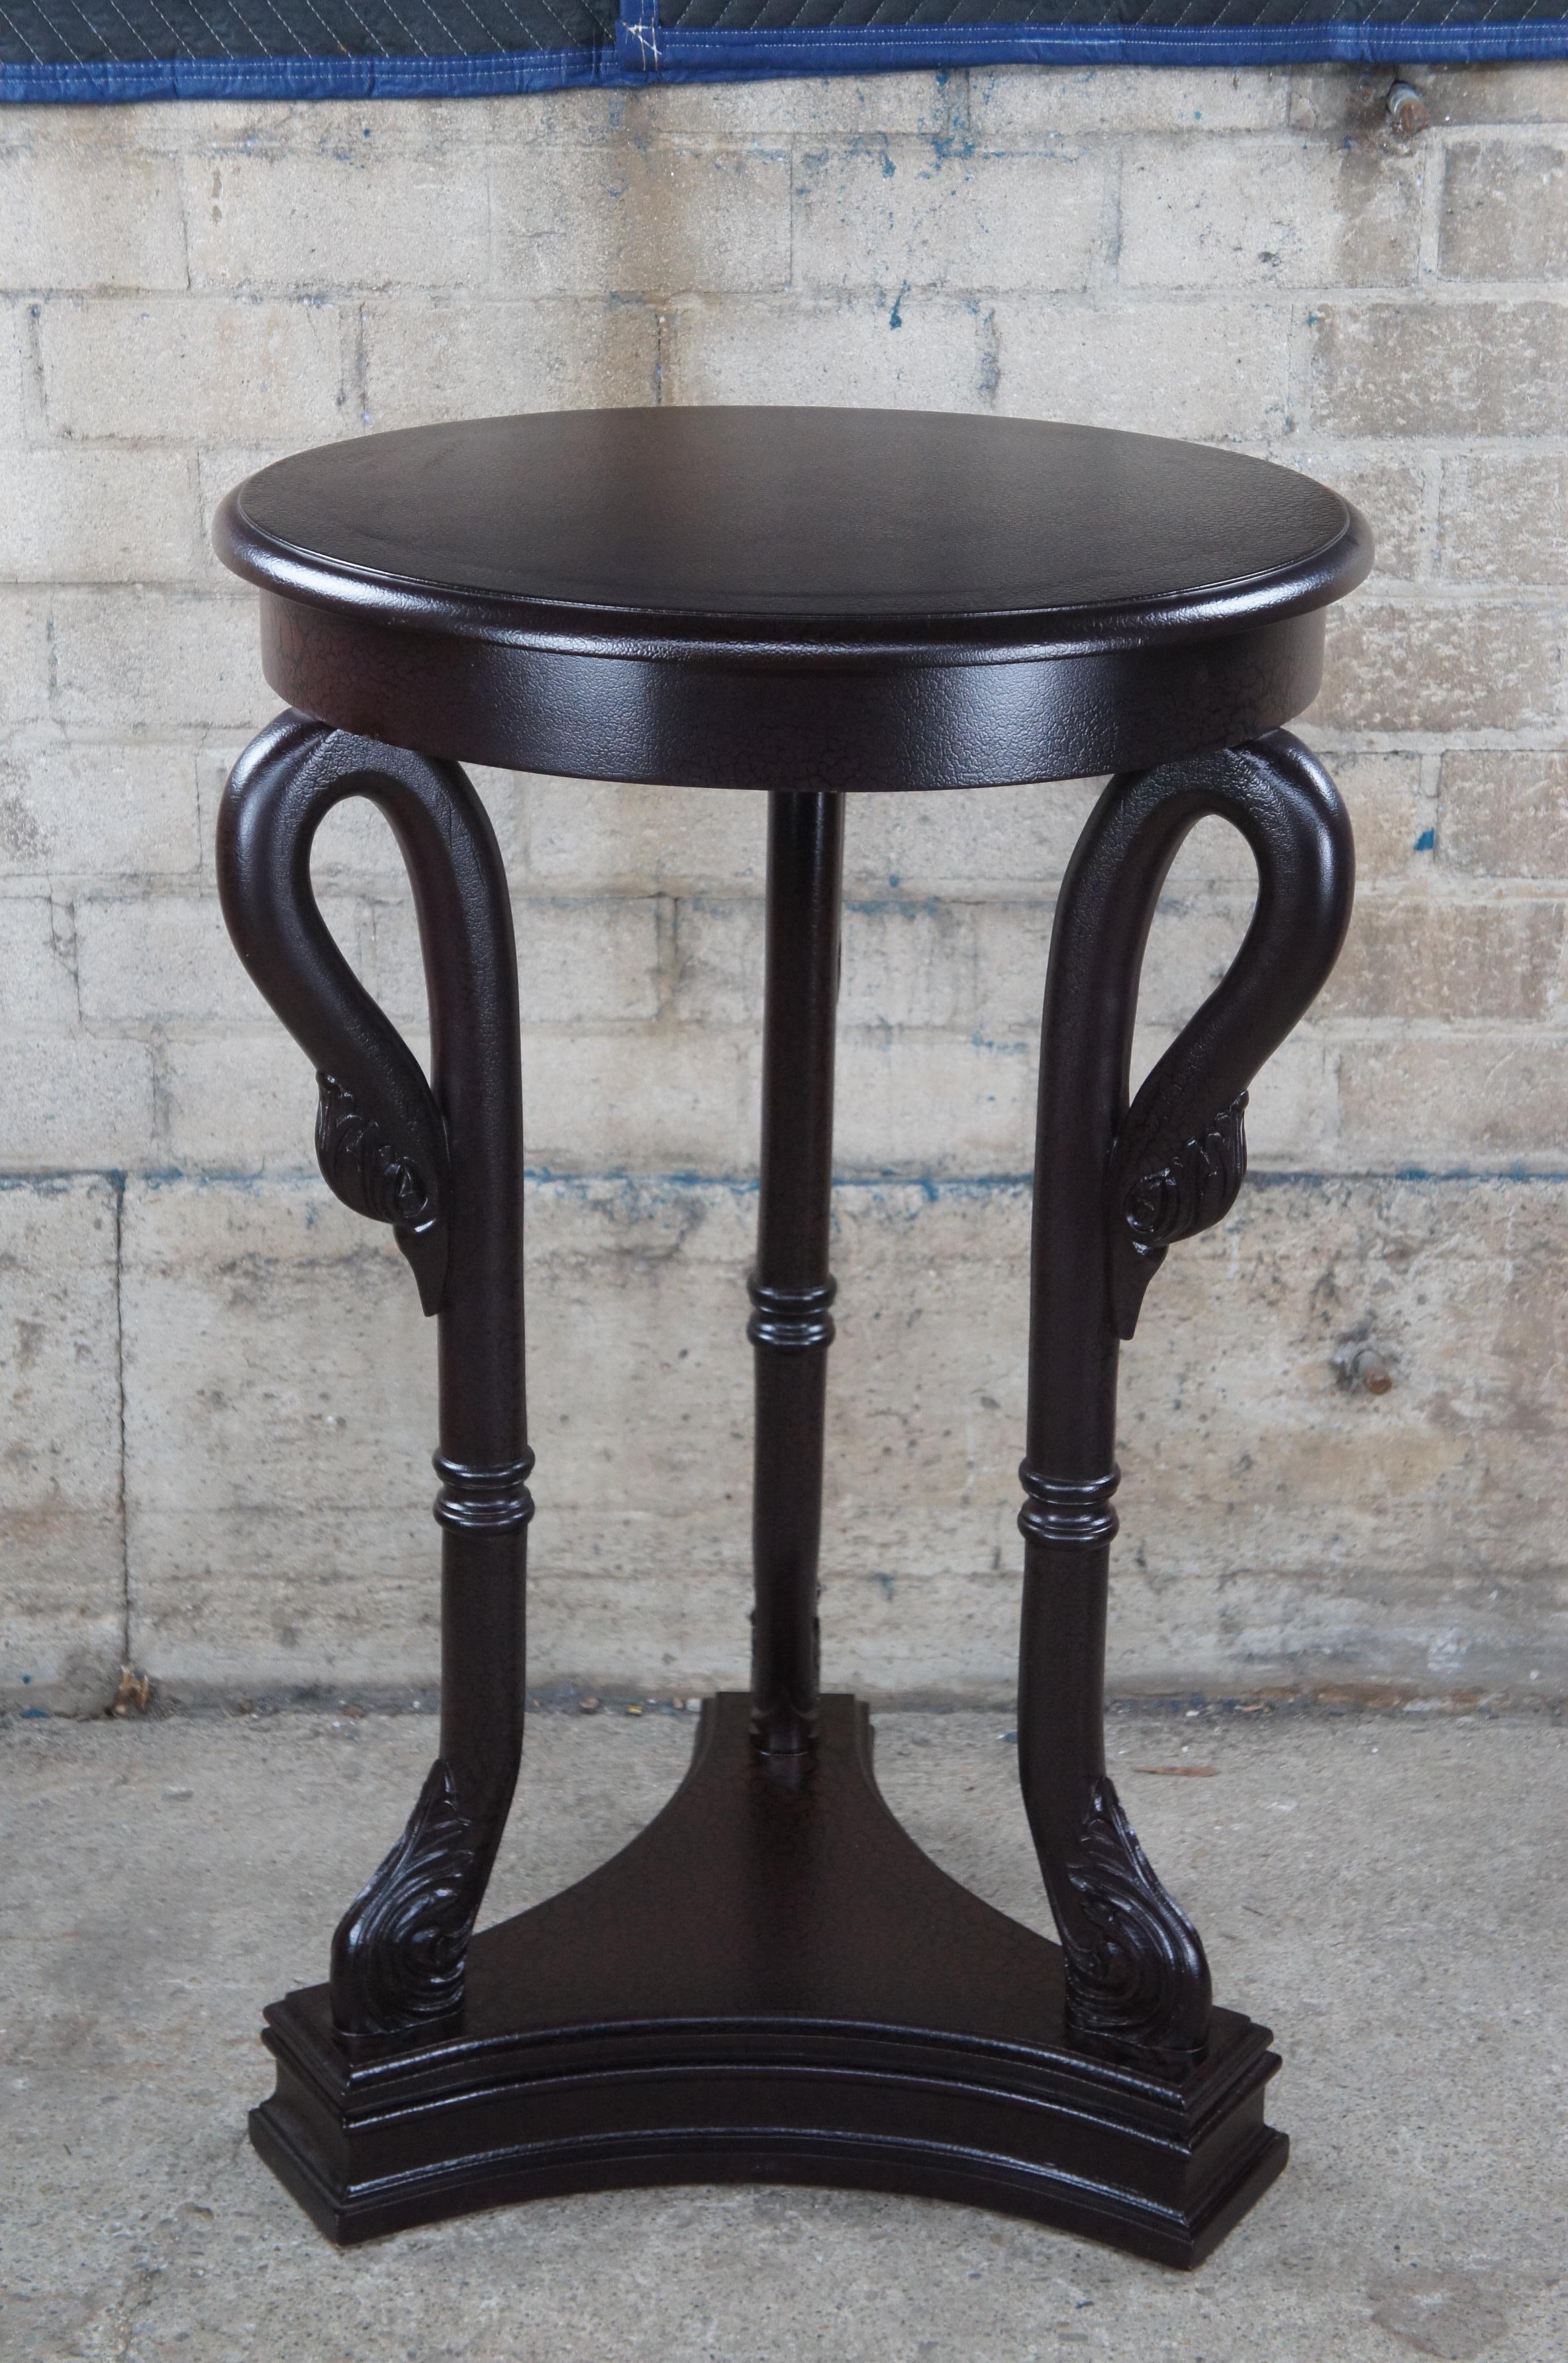 Hardwood French Directoire Crackle Lacquer Gueridon Swan Pedestal Table Sculpture Stand For Sale